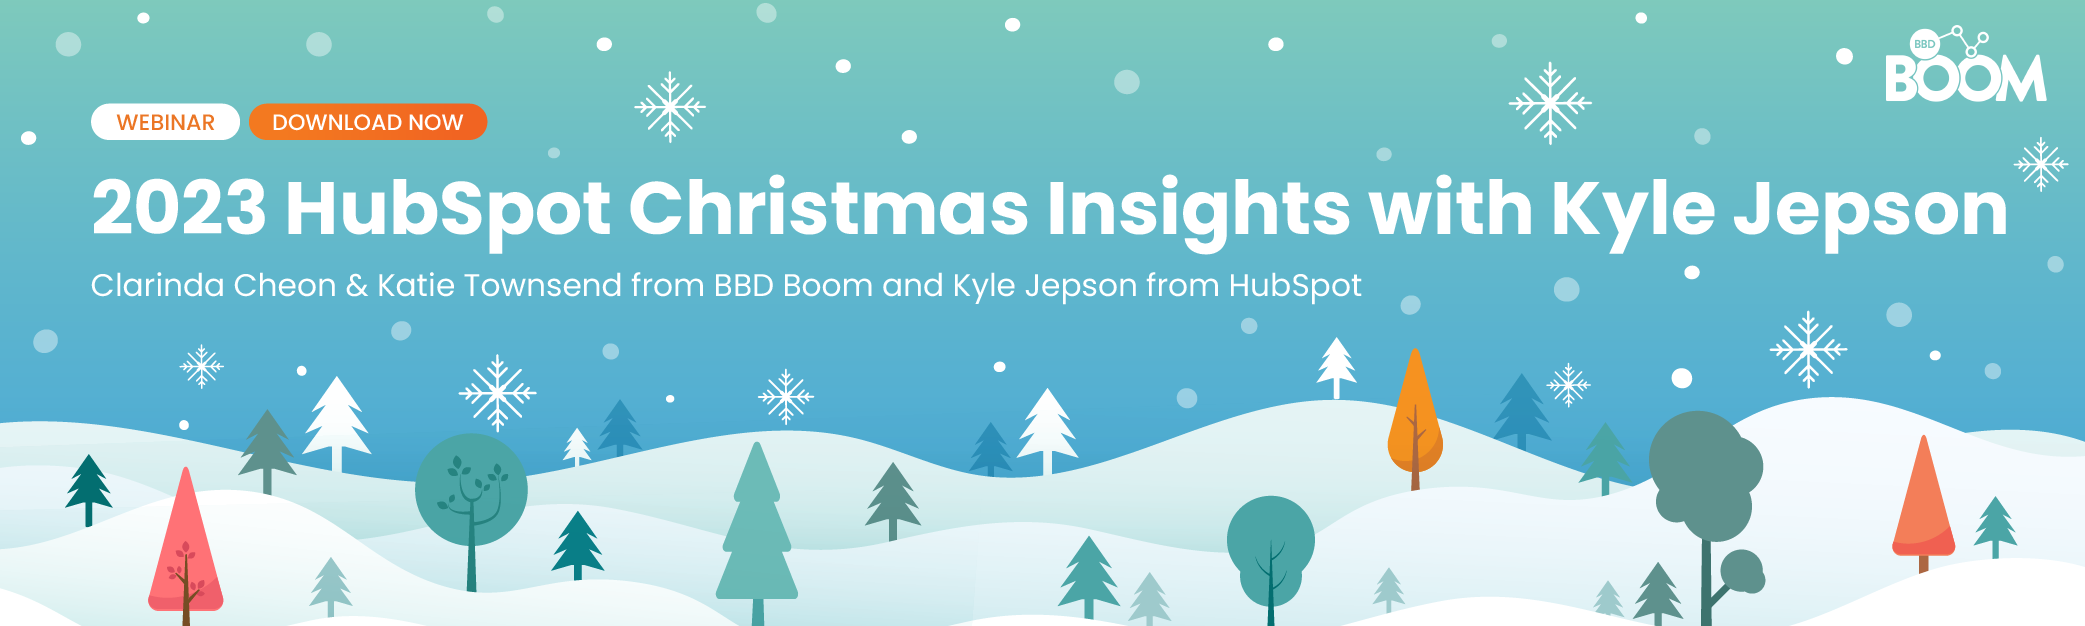 Webinar 2023 HubSpot Christmas Insights with Kyle Jepson